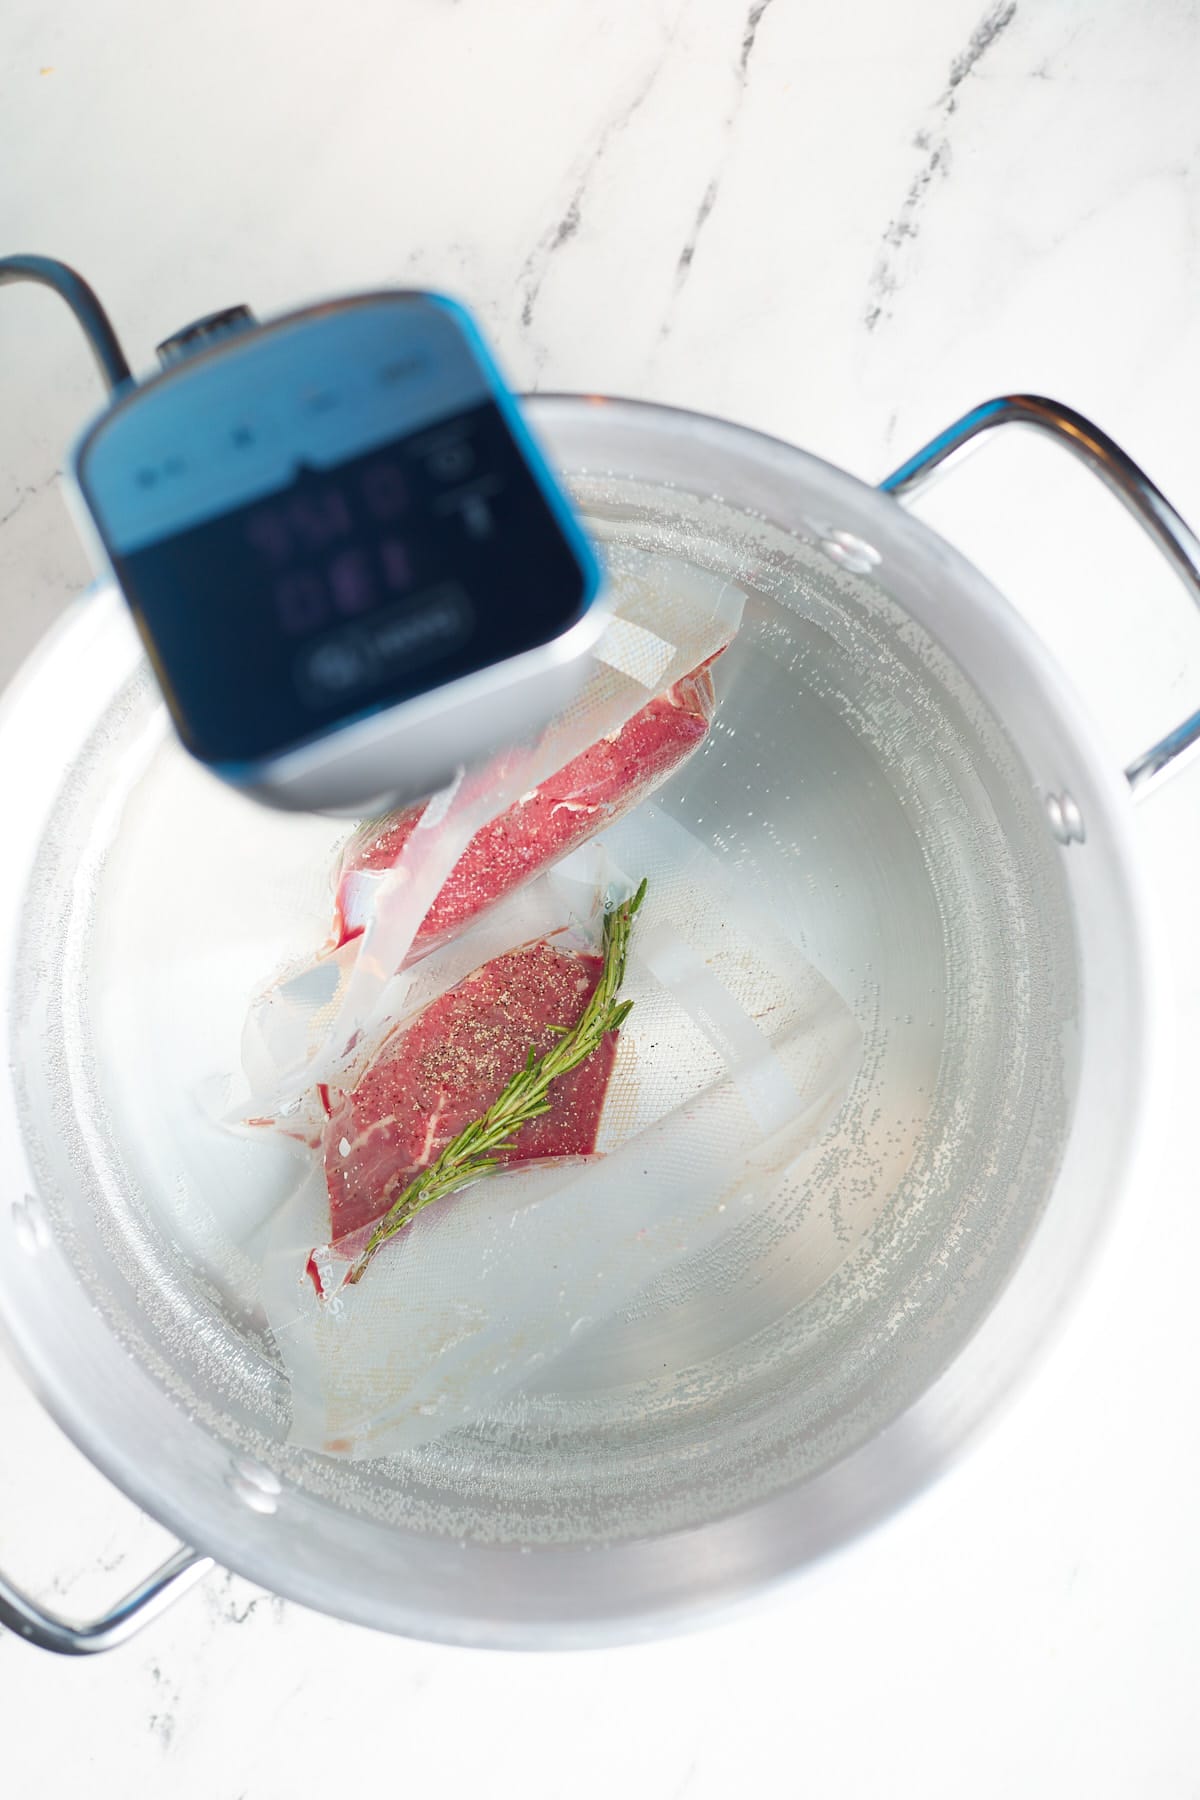 The filet mignon in a pot of water with a sous vide machine.